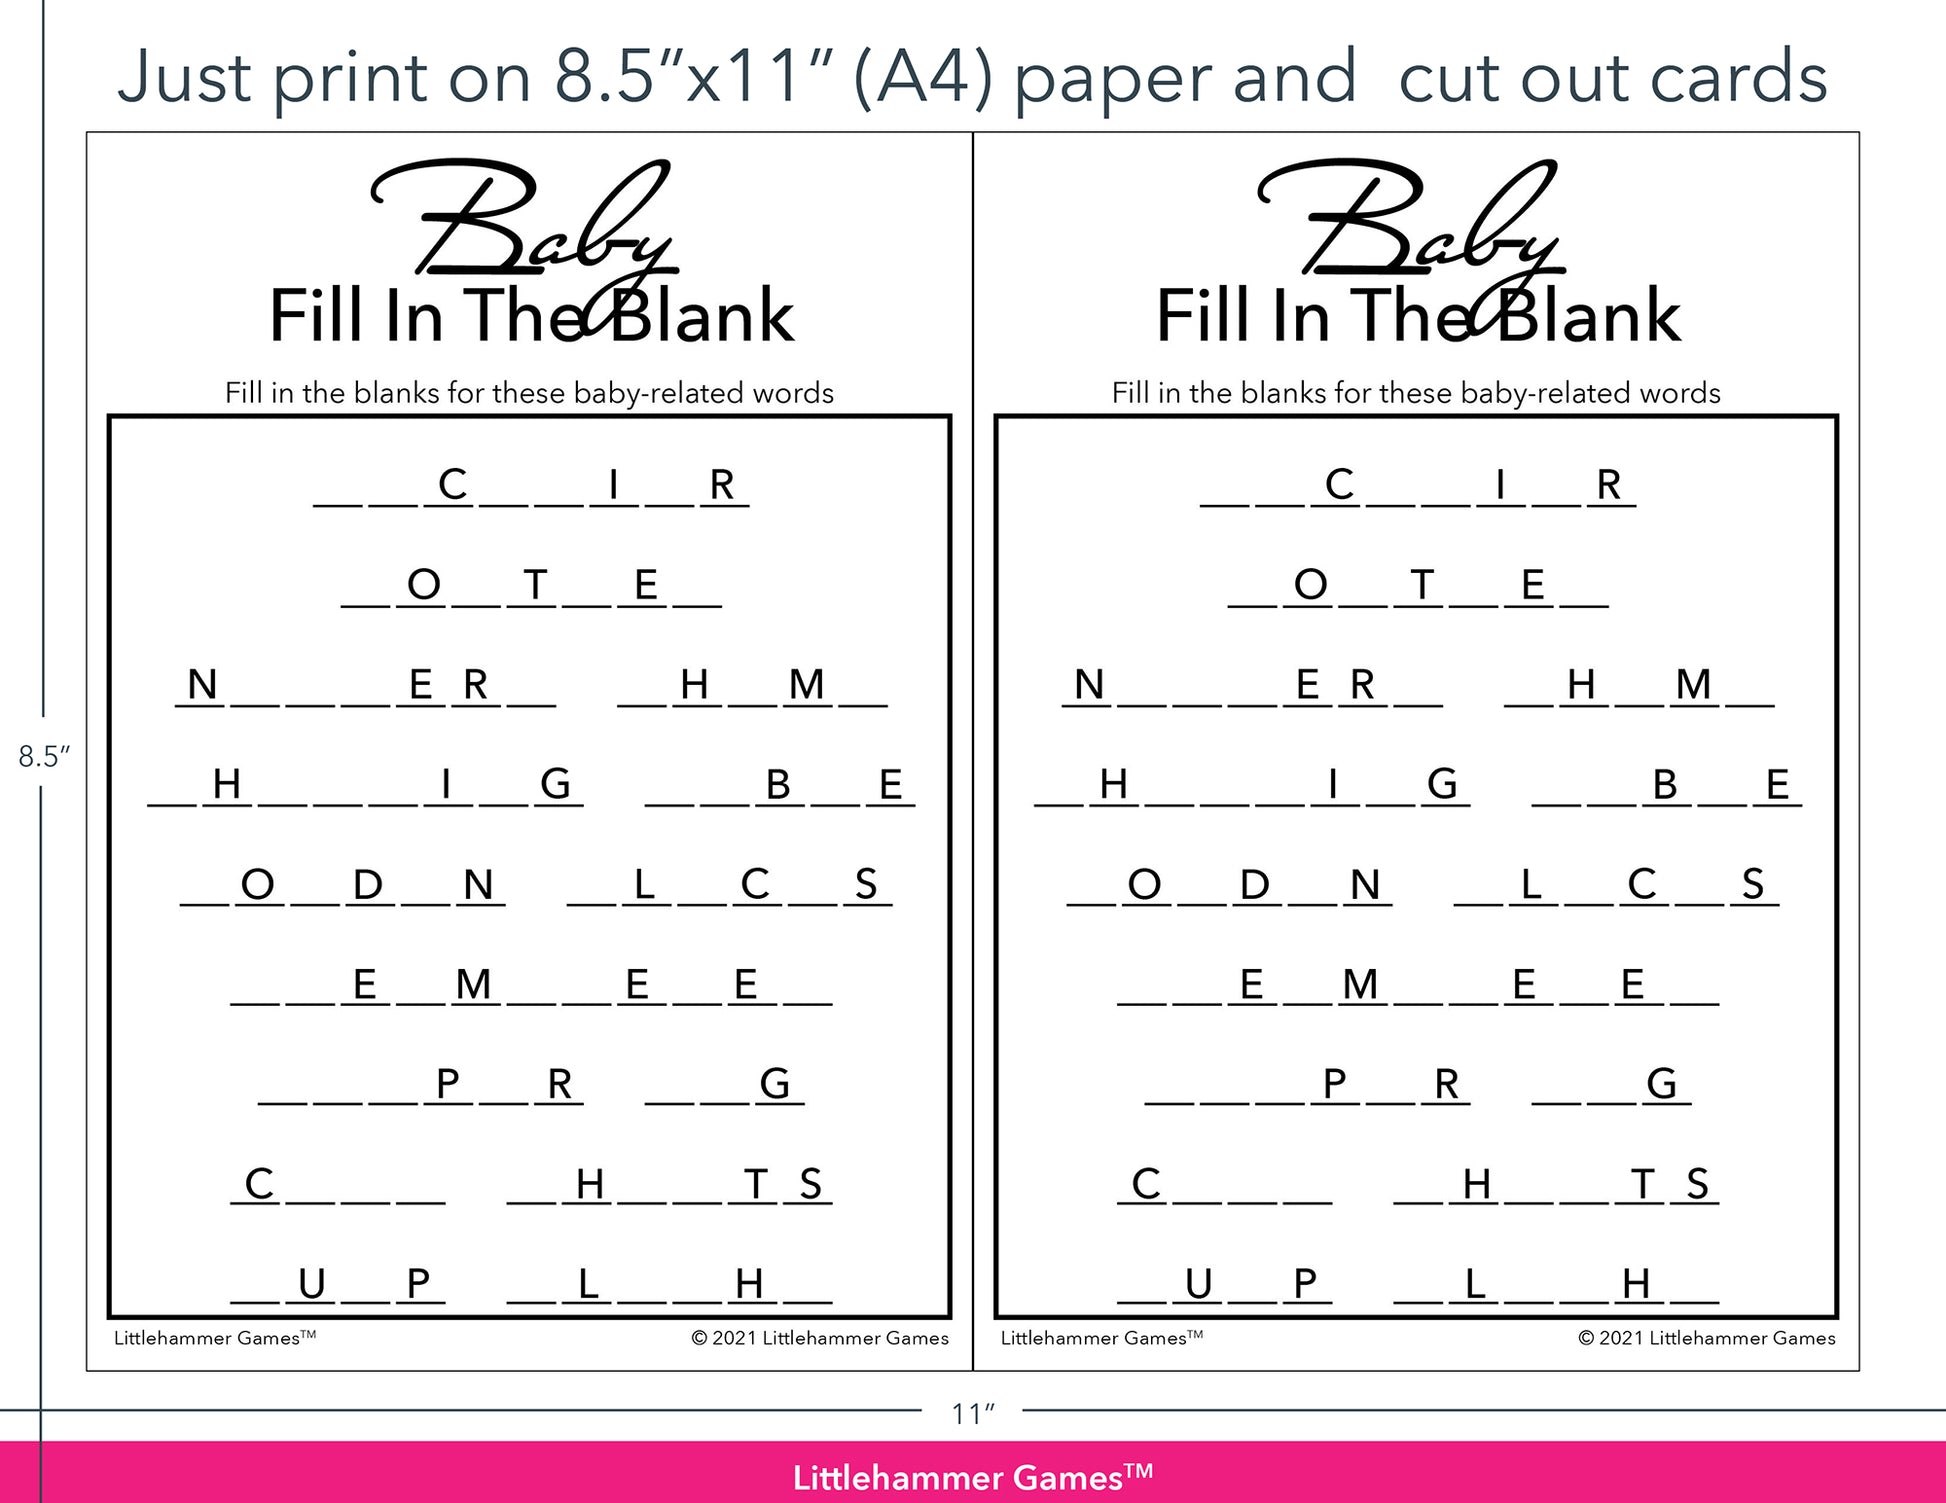 Baby Fill in the Blank minimalist black and white game cards with printing instructions